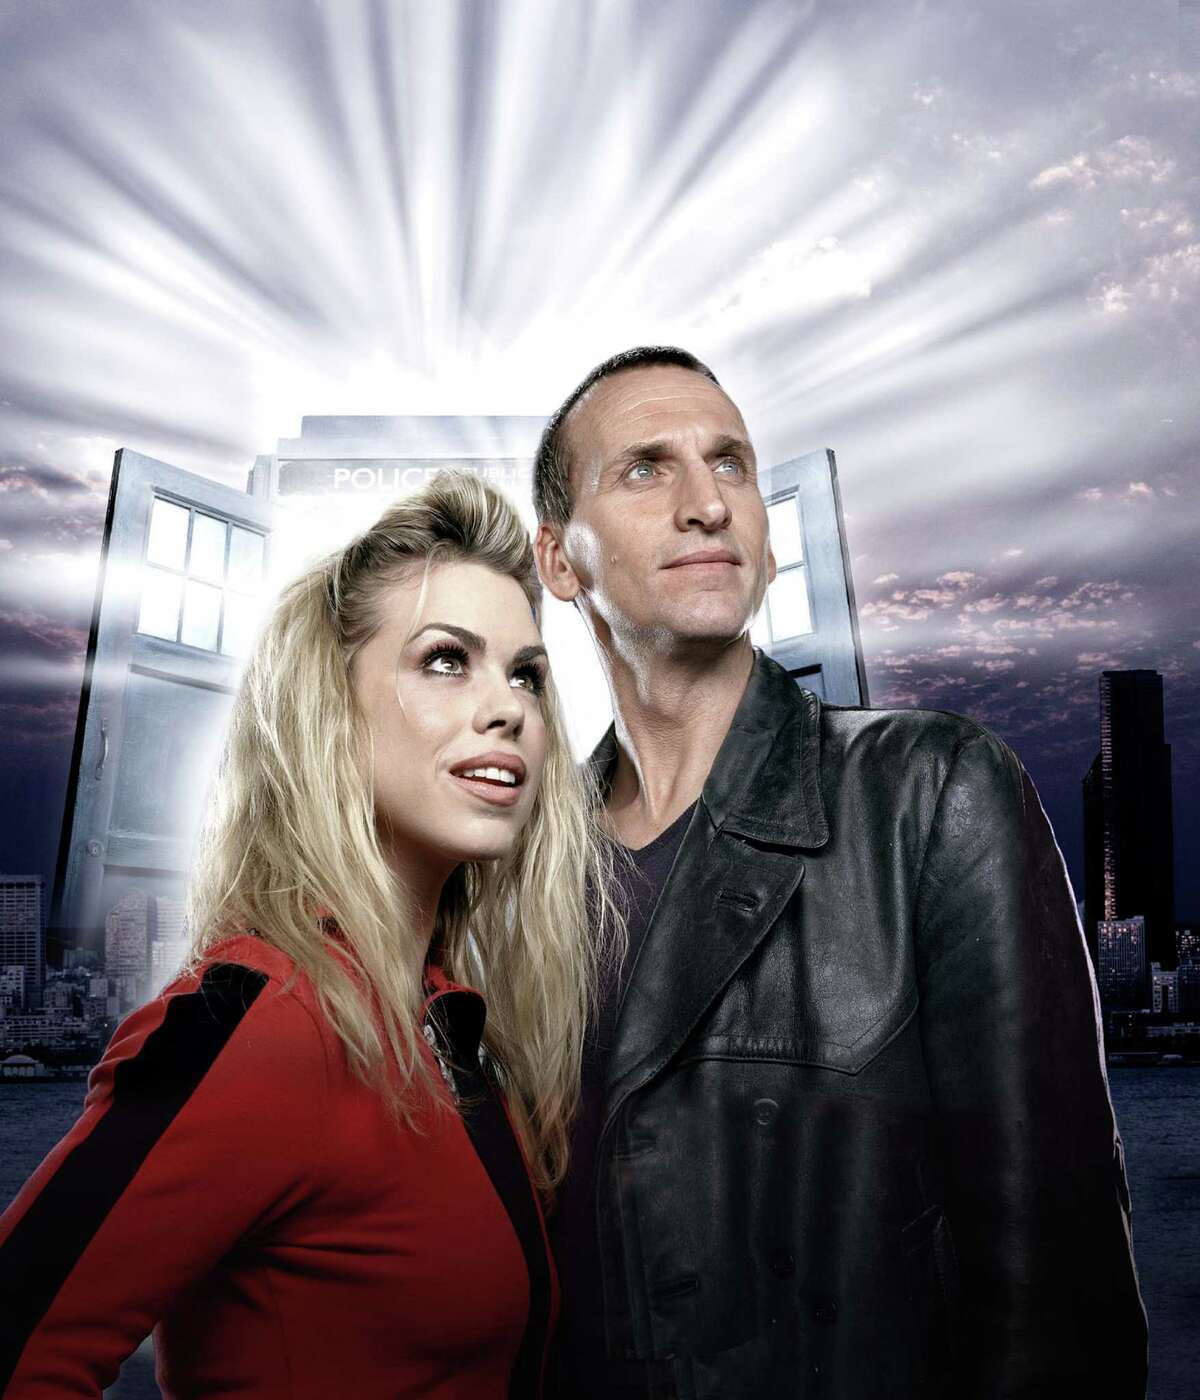 Billie Piper starred as Rose Tyler and Christopher Eccleston as the Ninth Doctor in "Dr. Who."